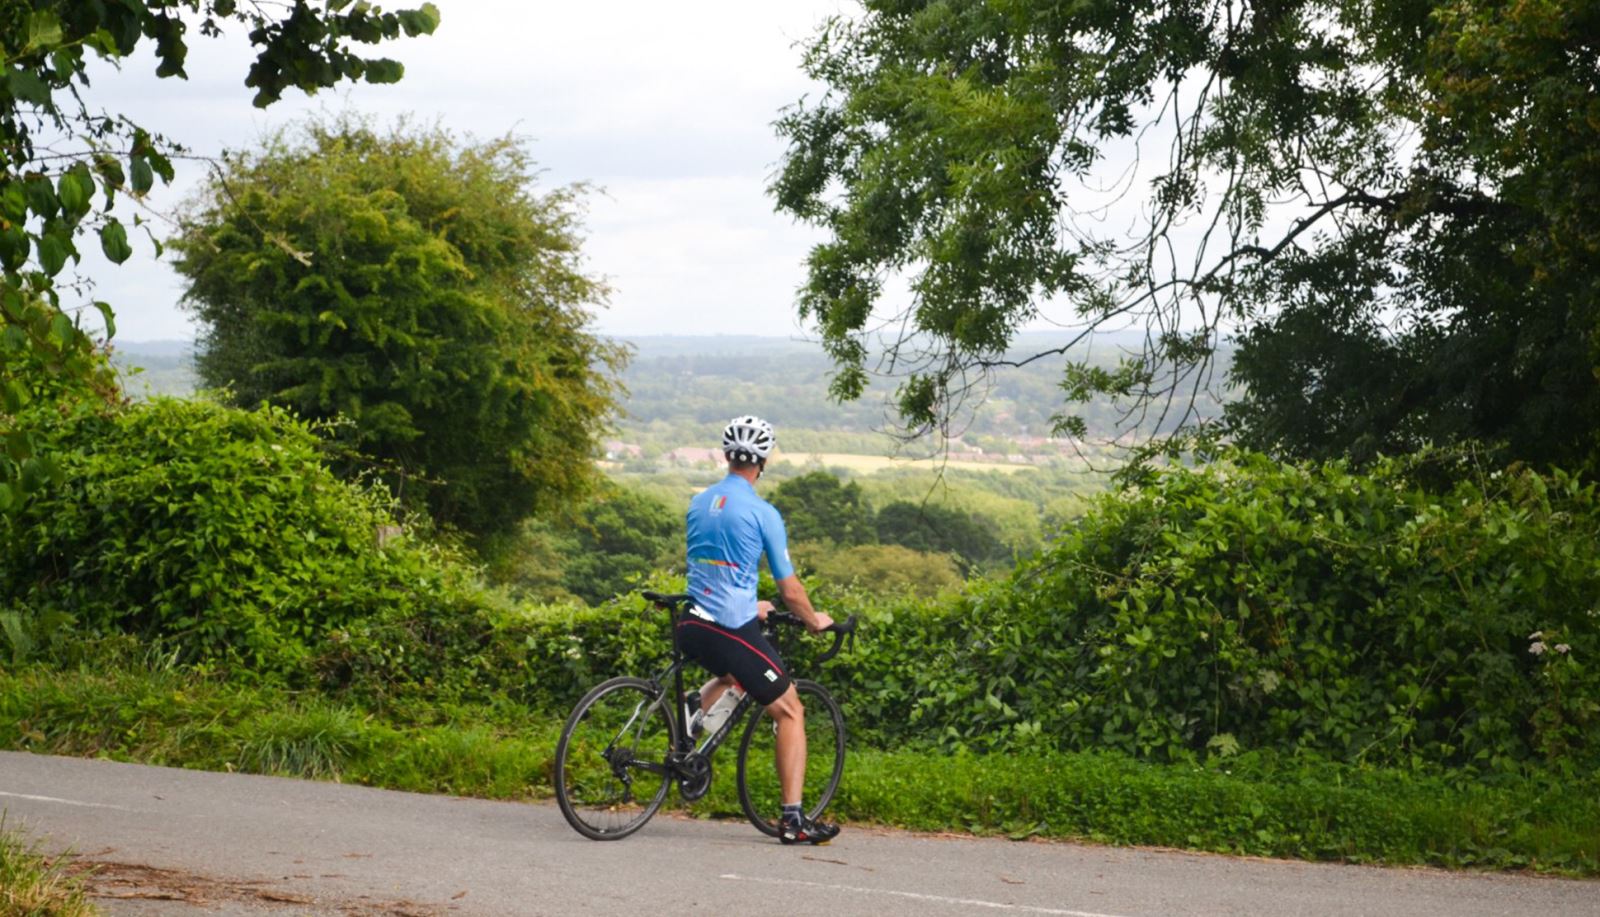 Cyclist at Ashford Hangers in East Hampshire